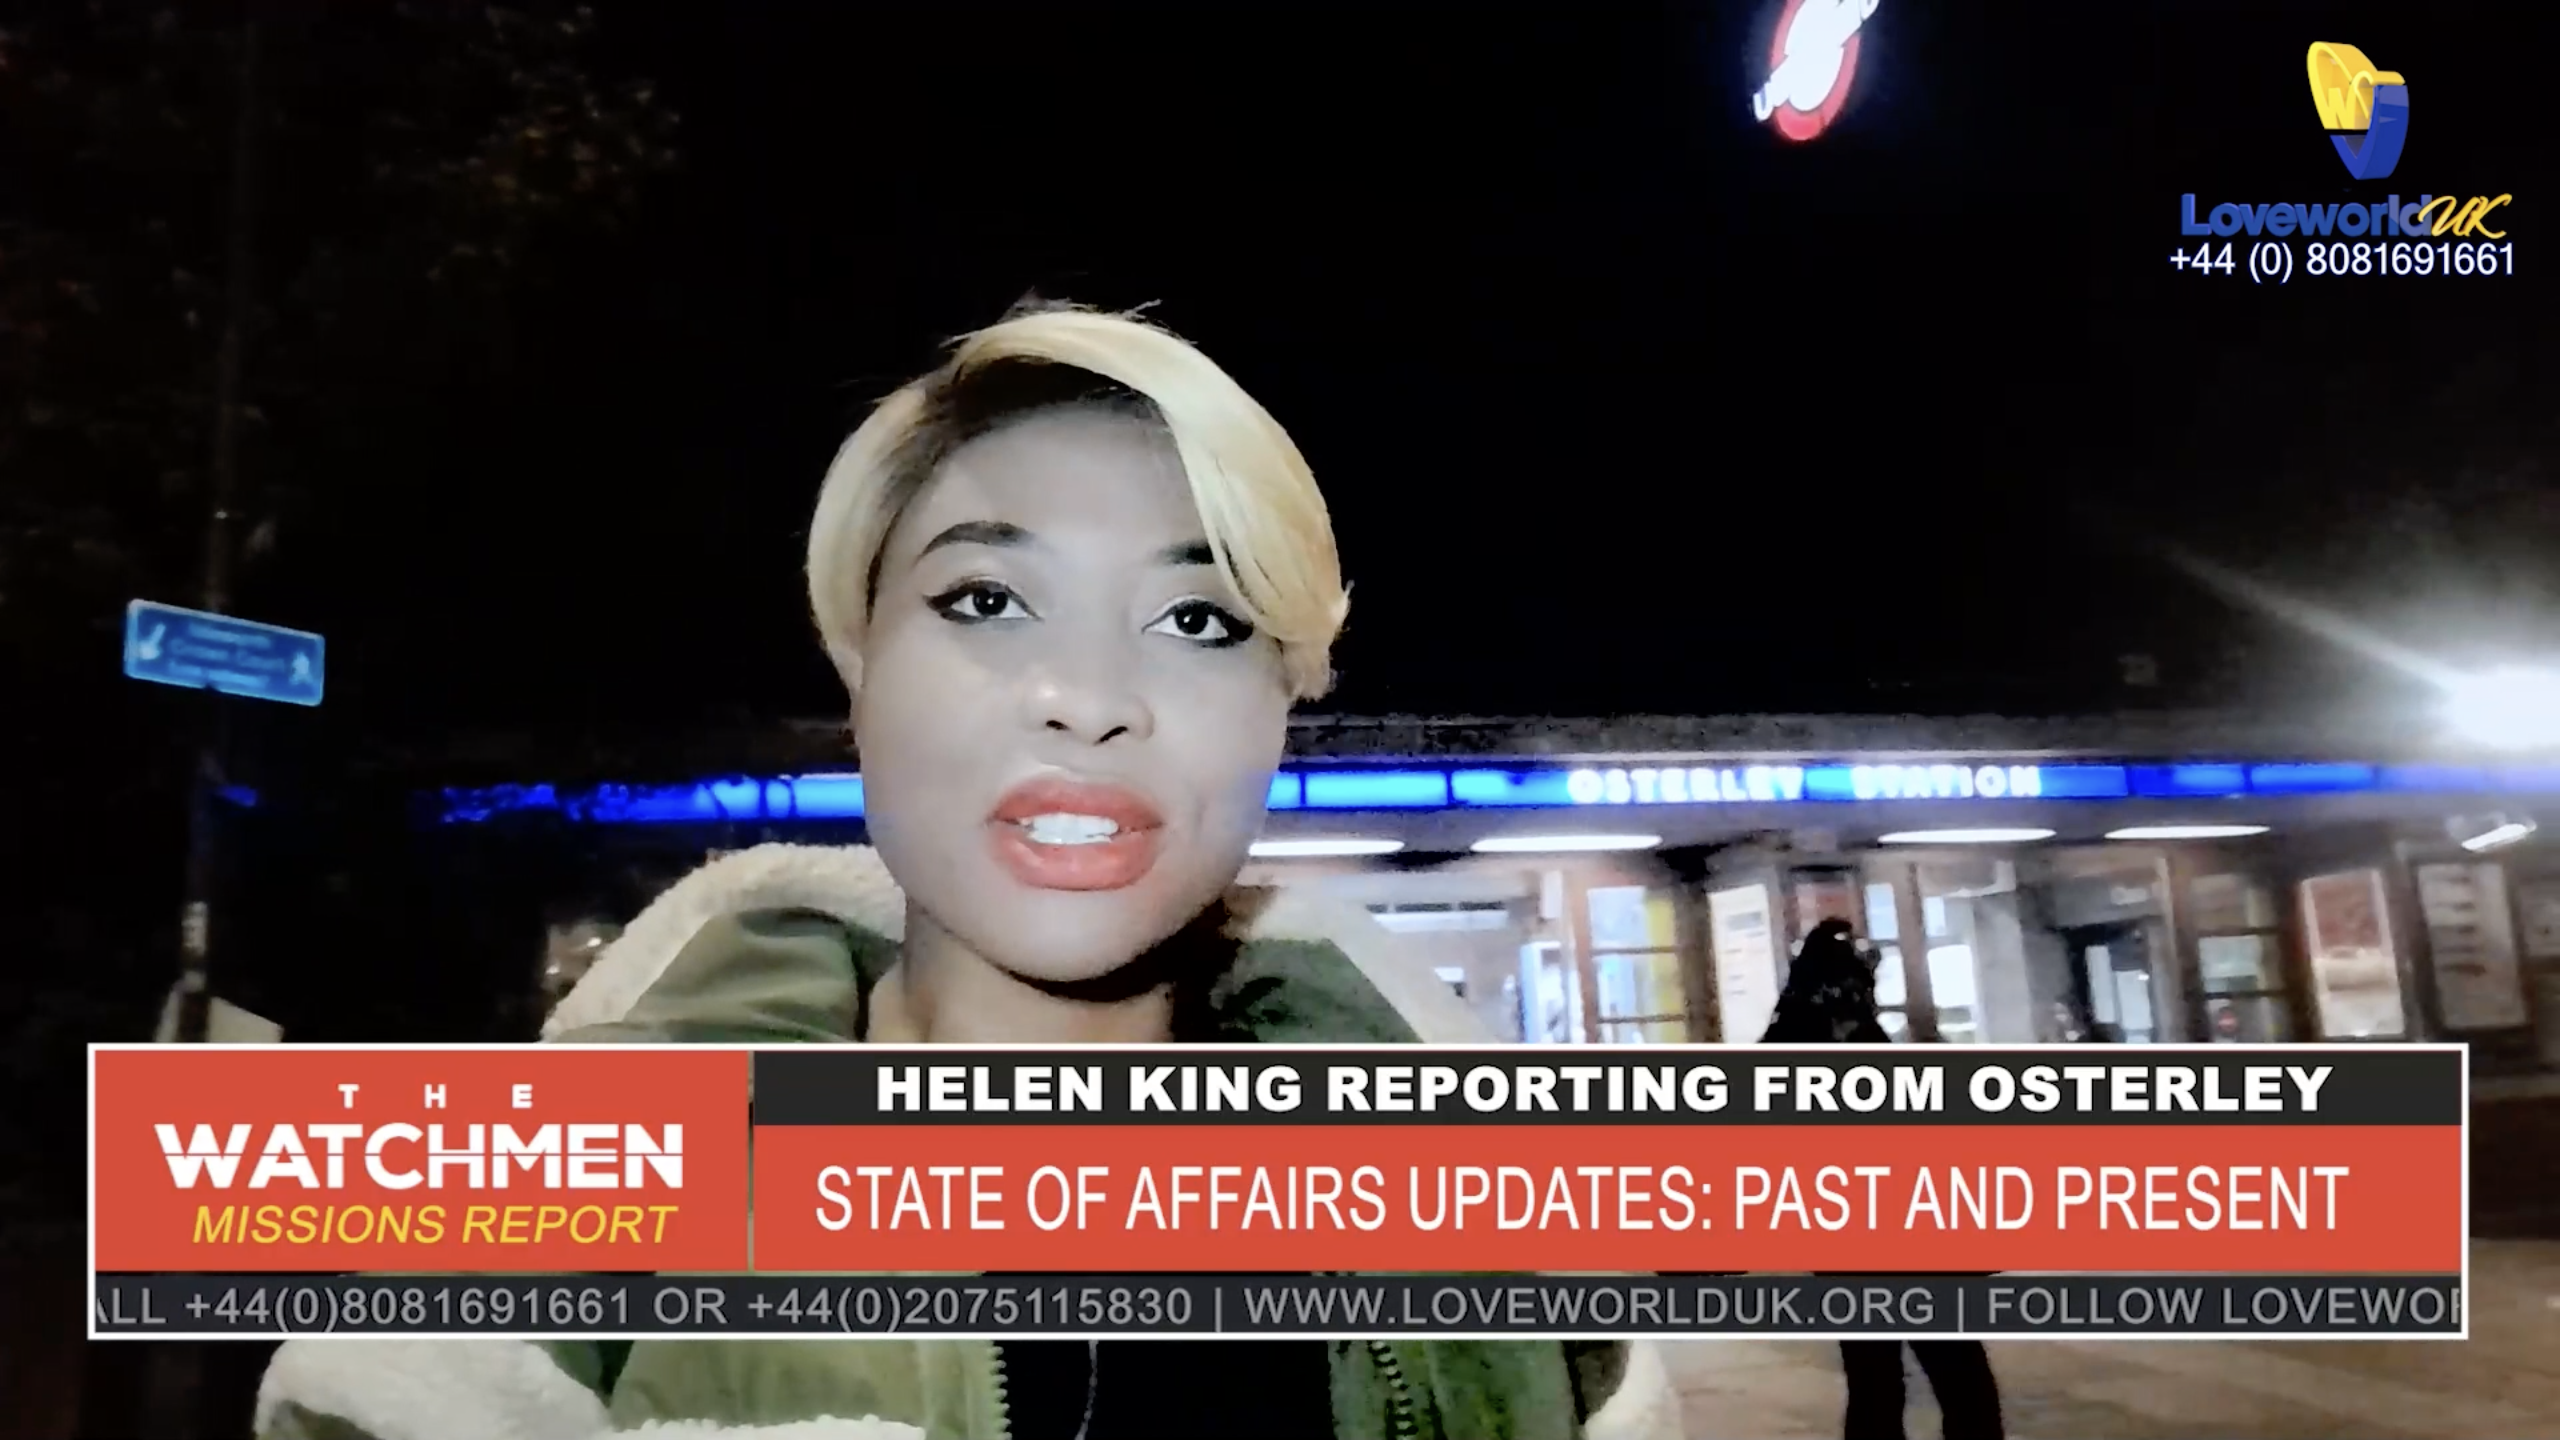 THE WATCHMEN_EP 99: HELEN KING'S SPECIAL REPORTS IN ICONIC LOCATIONS_ACTON TOWN, OSTERLEY,  HOUNSLOW, HATTON, HAMMERSMITH